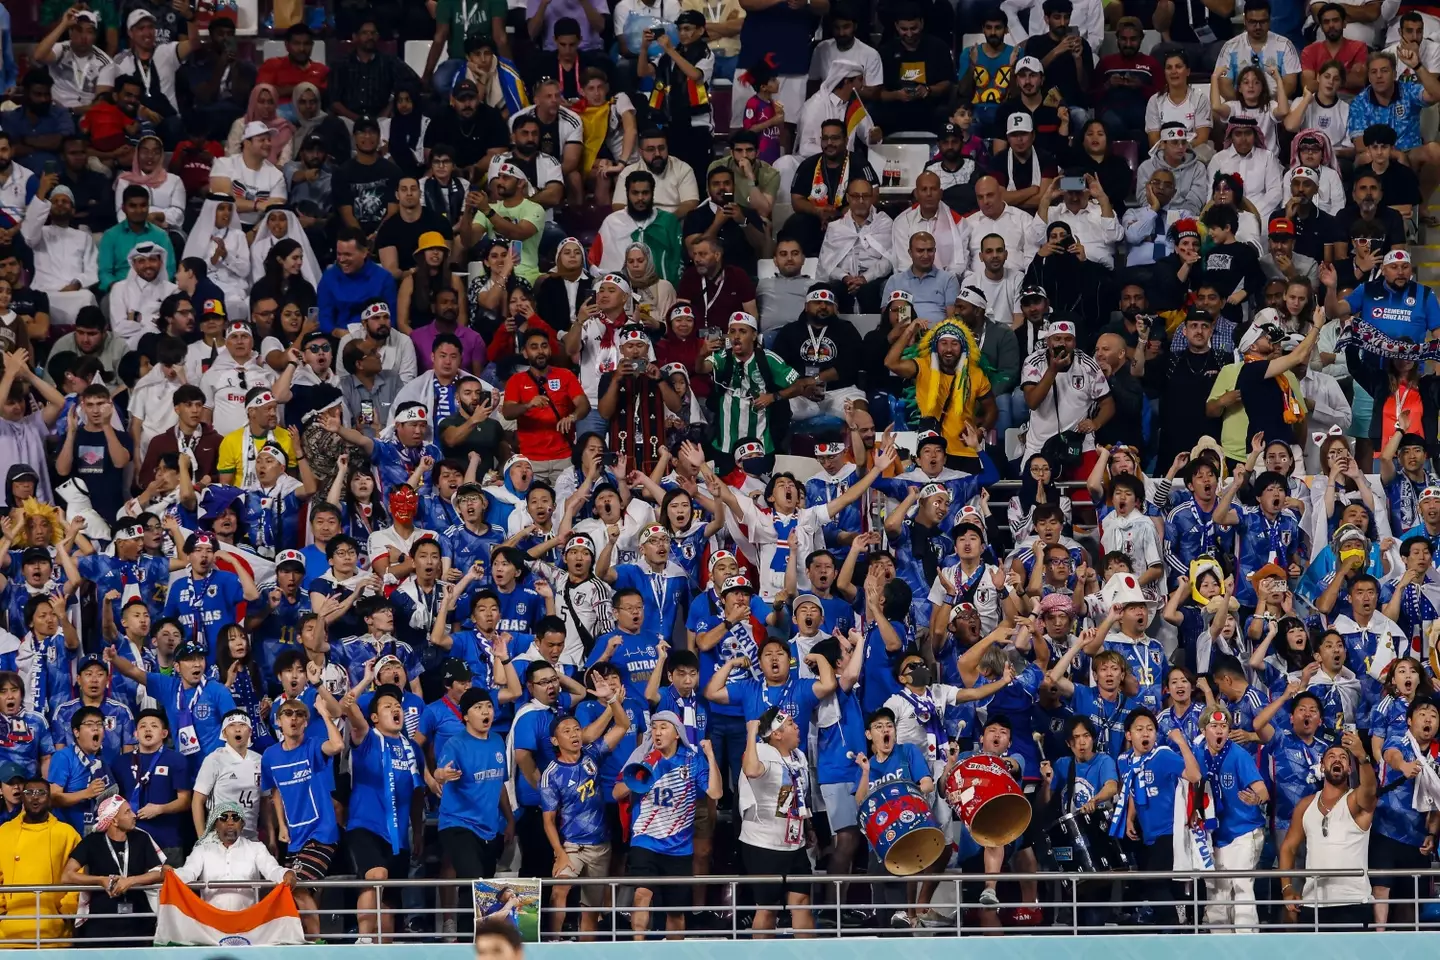 Japan fans cheer on their team during the game with Germany. Image: Alamy